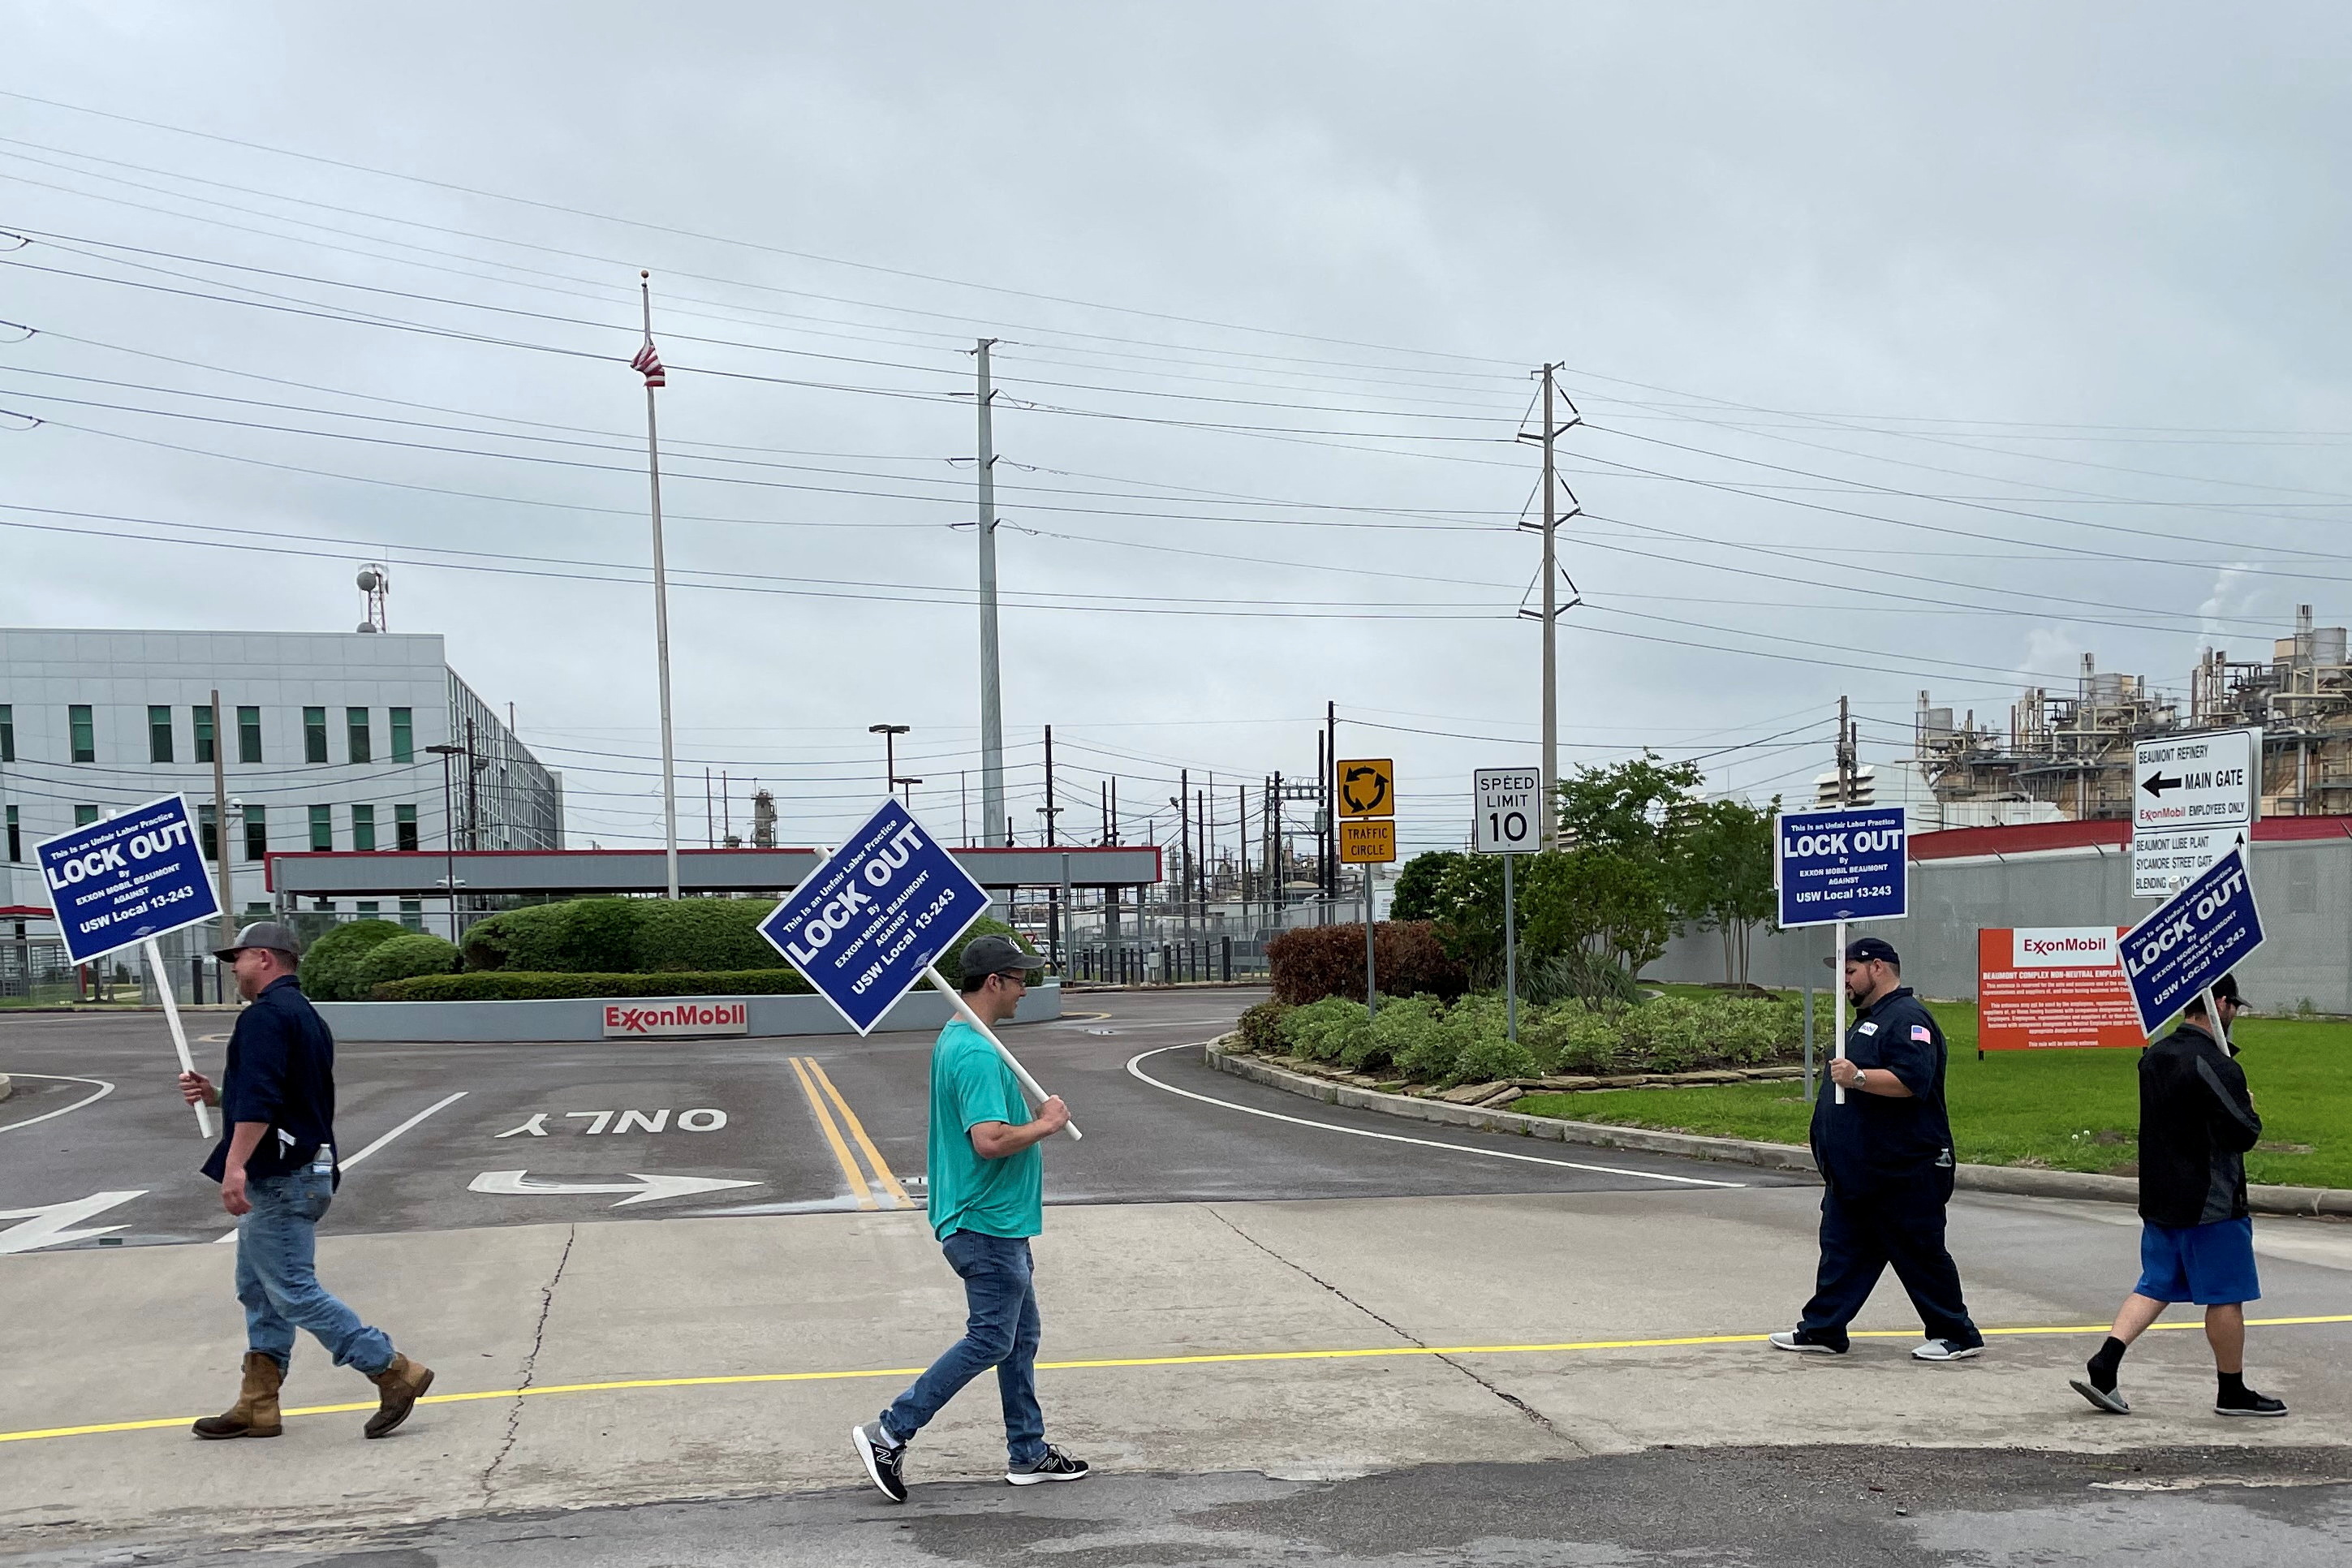 United Steelworkers (USW) union members picket outside Exxon Mobil's oil refinery amid a contract dispute in Beaumont, Texas, U.S., May 1, 2021. Exxon locked out the plant's about 650 union-represented employees citing fears of a strike. Picture taken May 1, 2021. REUTERS/Erwin Seba/File Photo